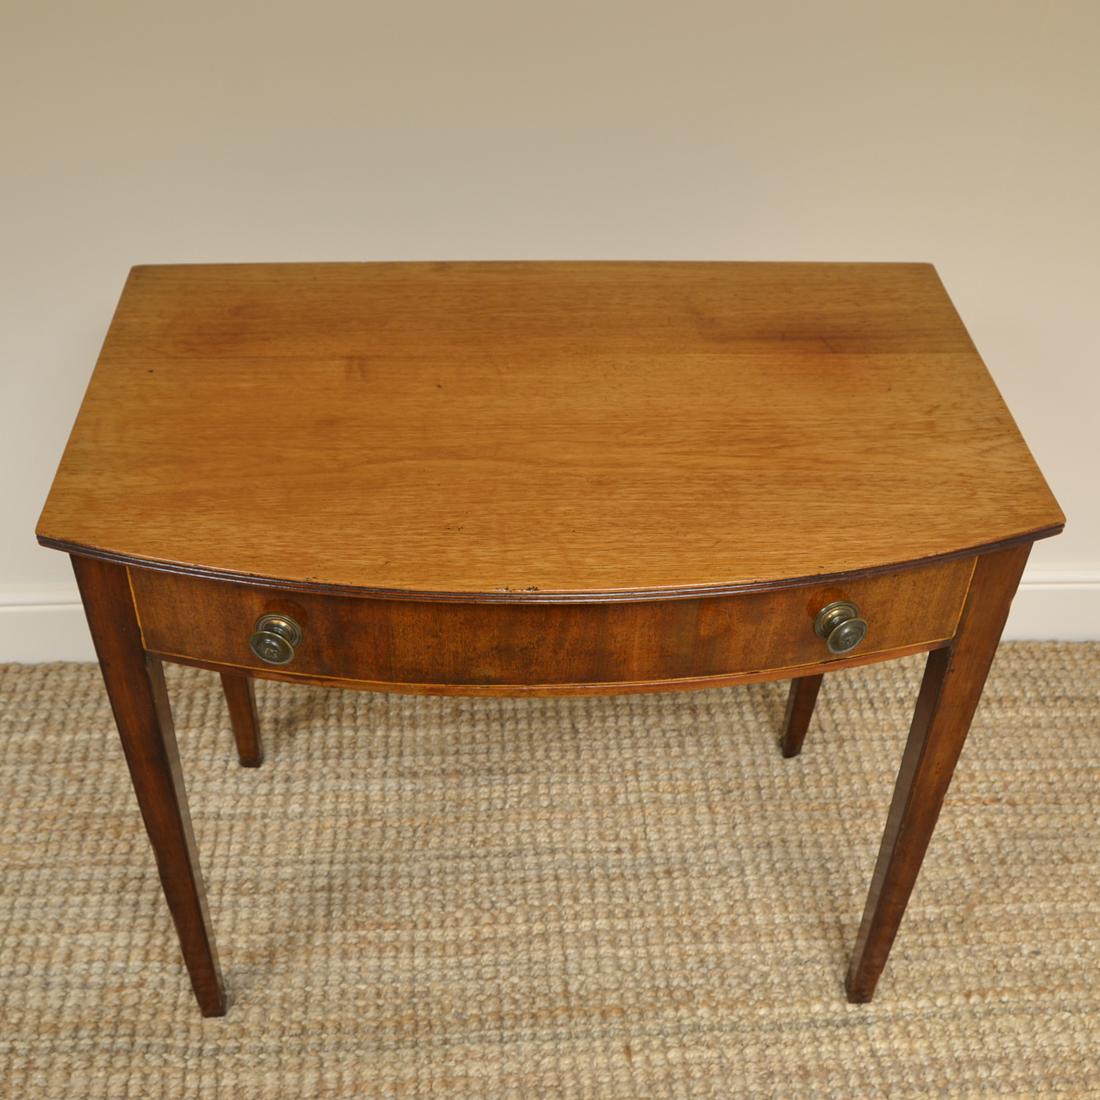 British Country House Regency Bow Fronted Antique Side Table